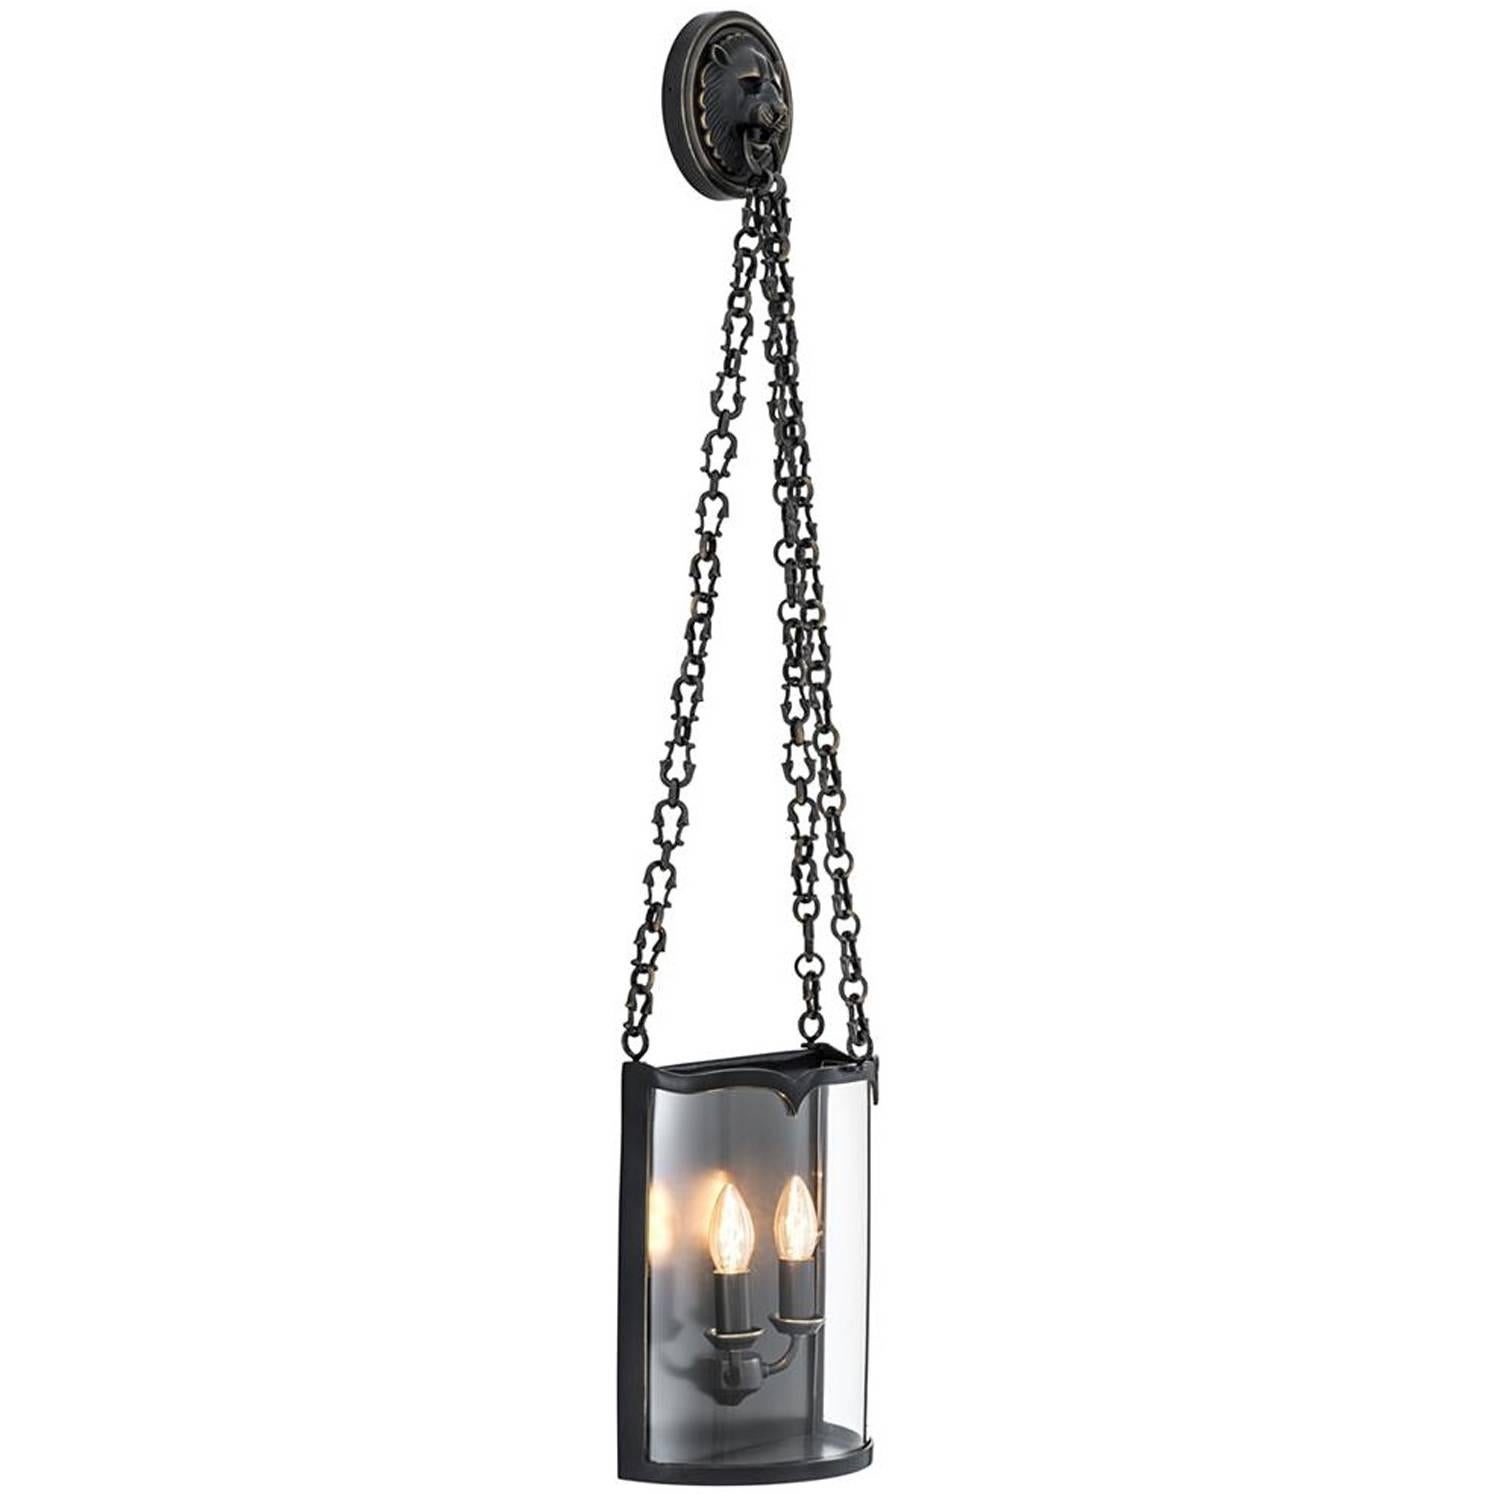 Lion Wall Lamp in Gunmetal Finish and Clear Glass